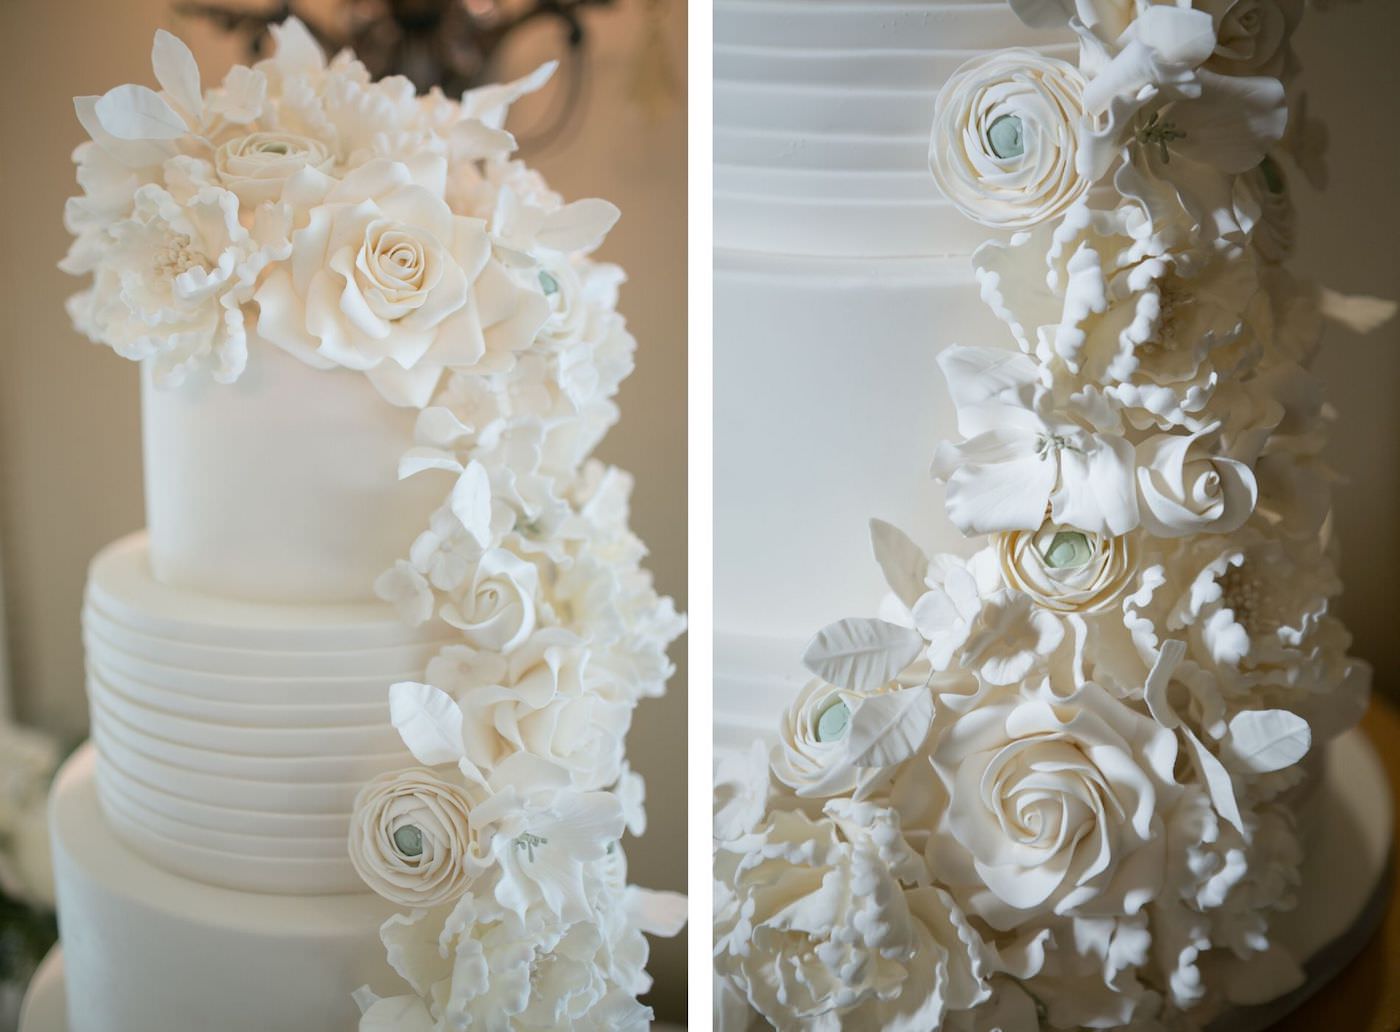 Classic White Buttercream Frosted Wedding Cake with Roses Sugar Flowers | Wedding Photographer Carrie Wildes Photography